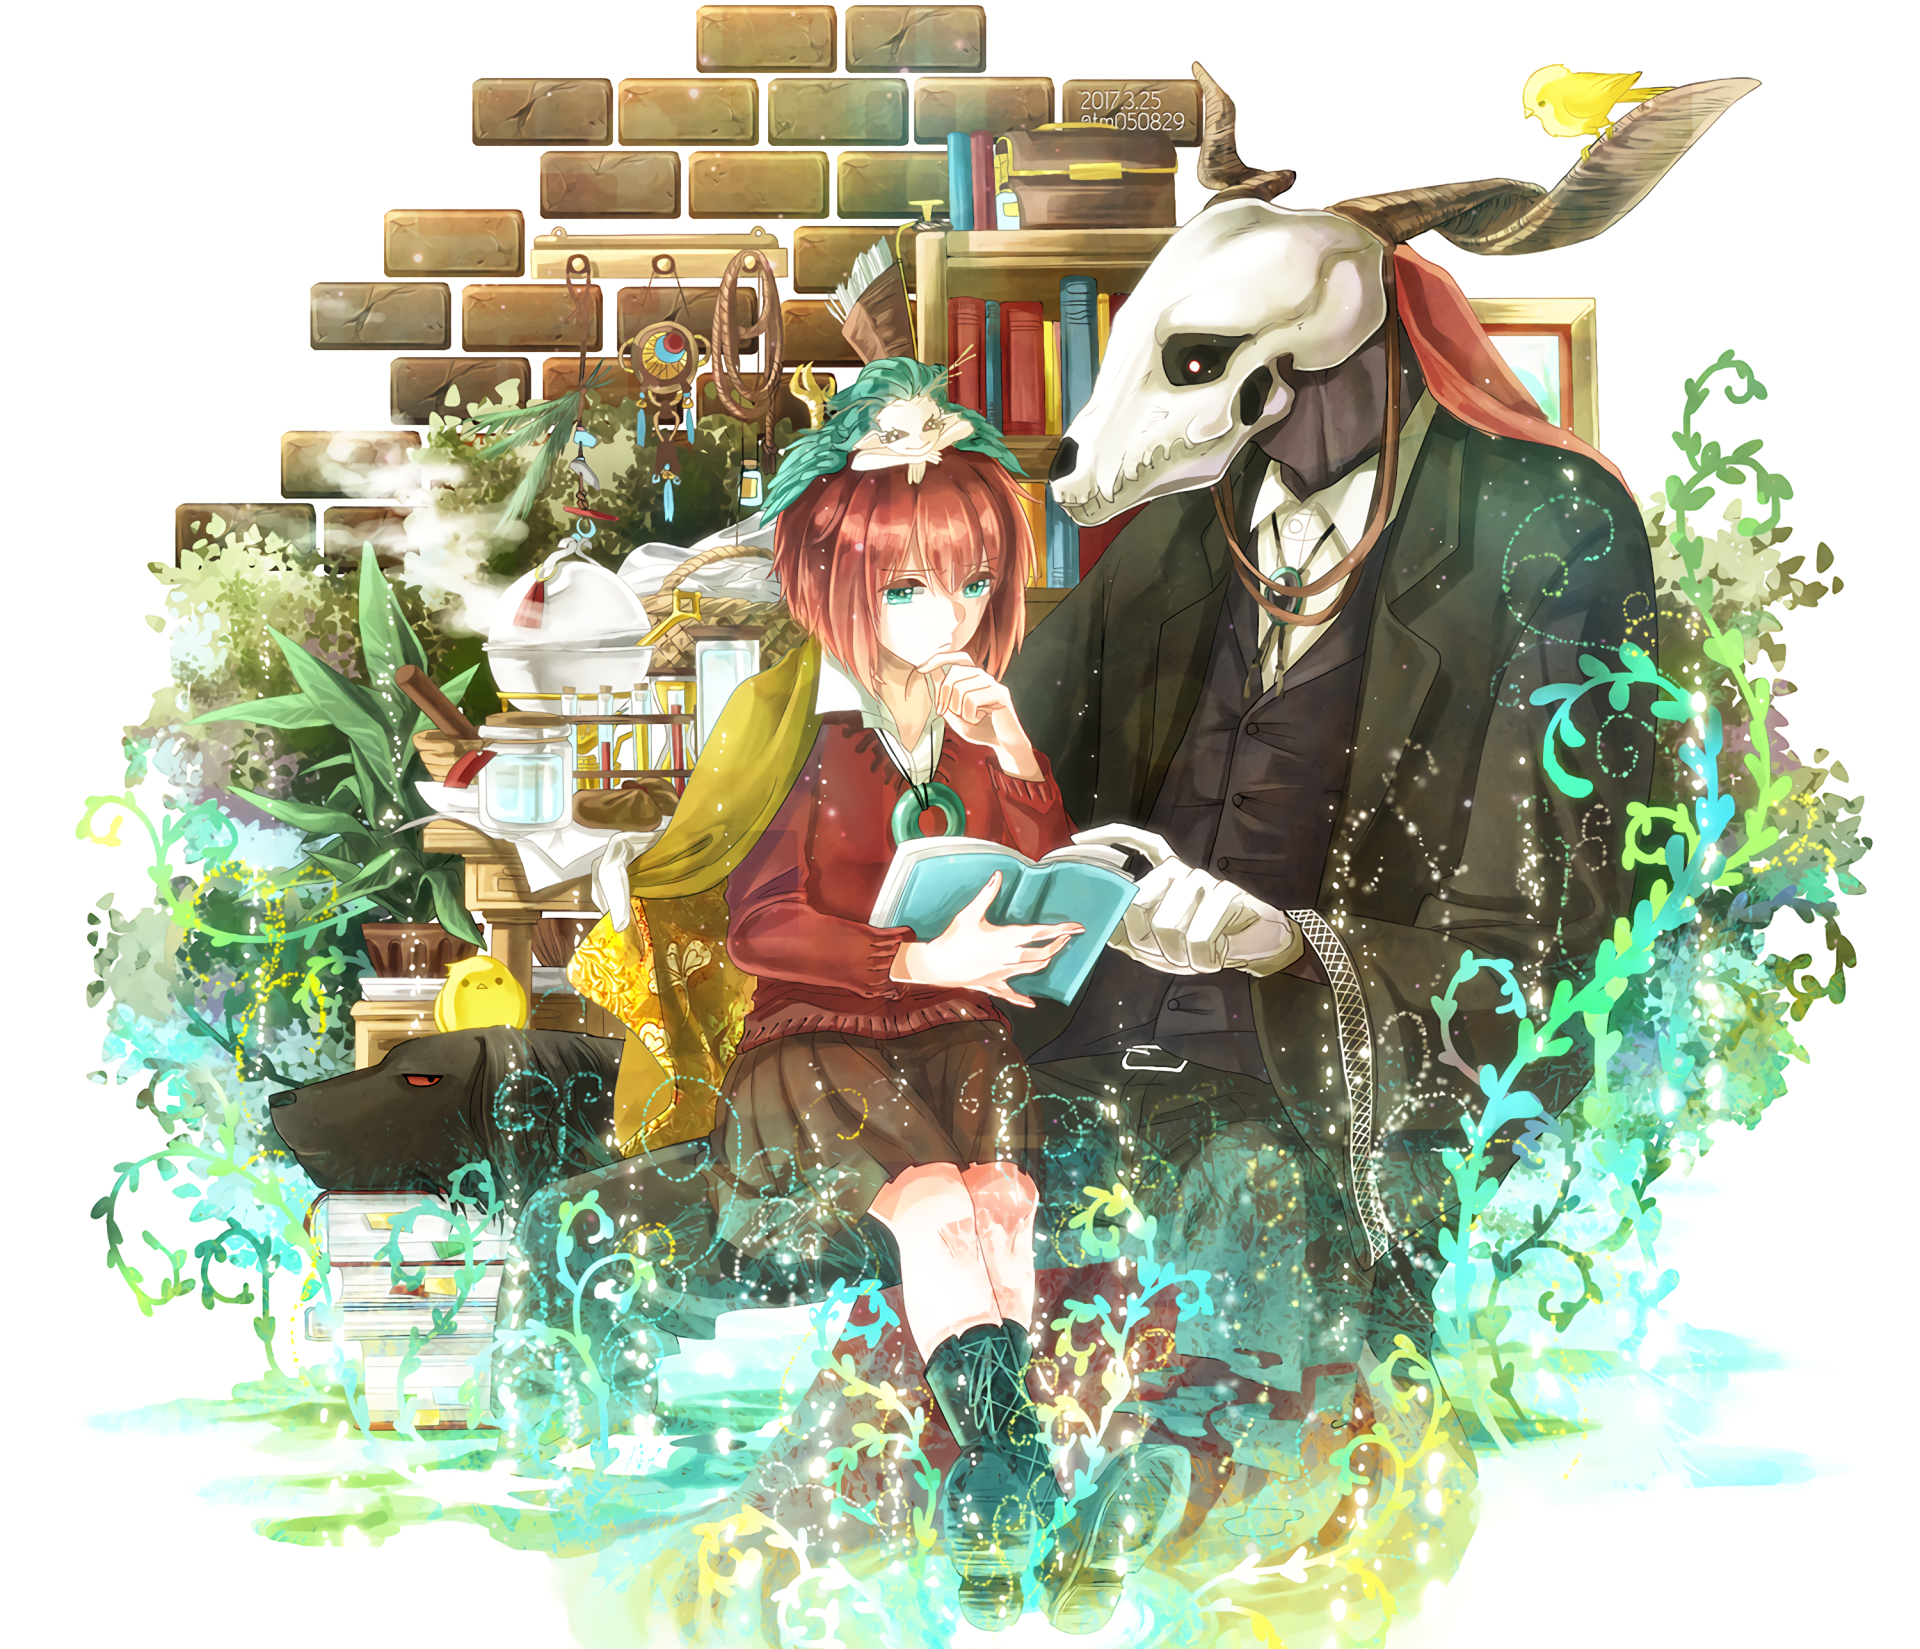 HD desktop wallpaper featuring Elias Ainsworth and Chise Hatori from the anime 'The Ancient Magus' Bride', surrounded by books and magical elements.